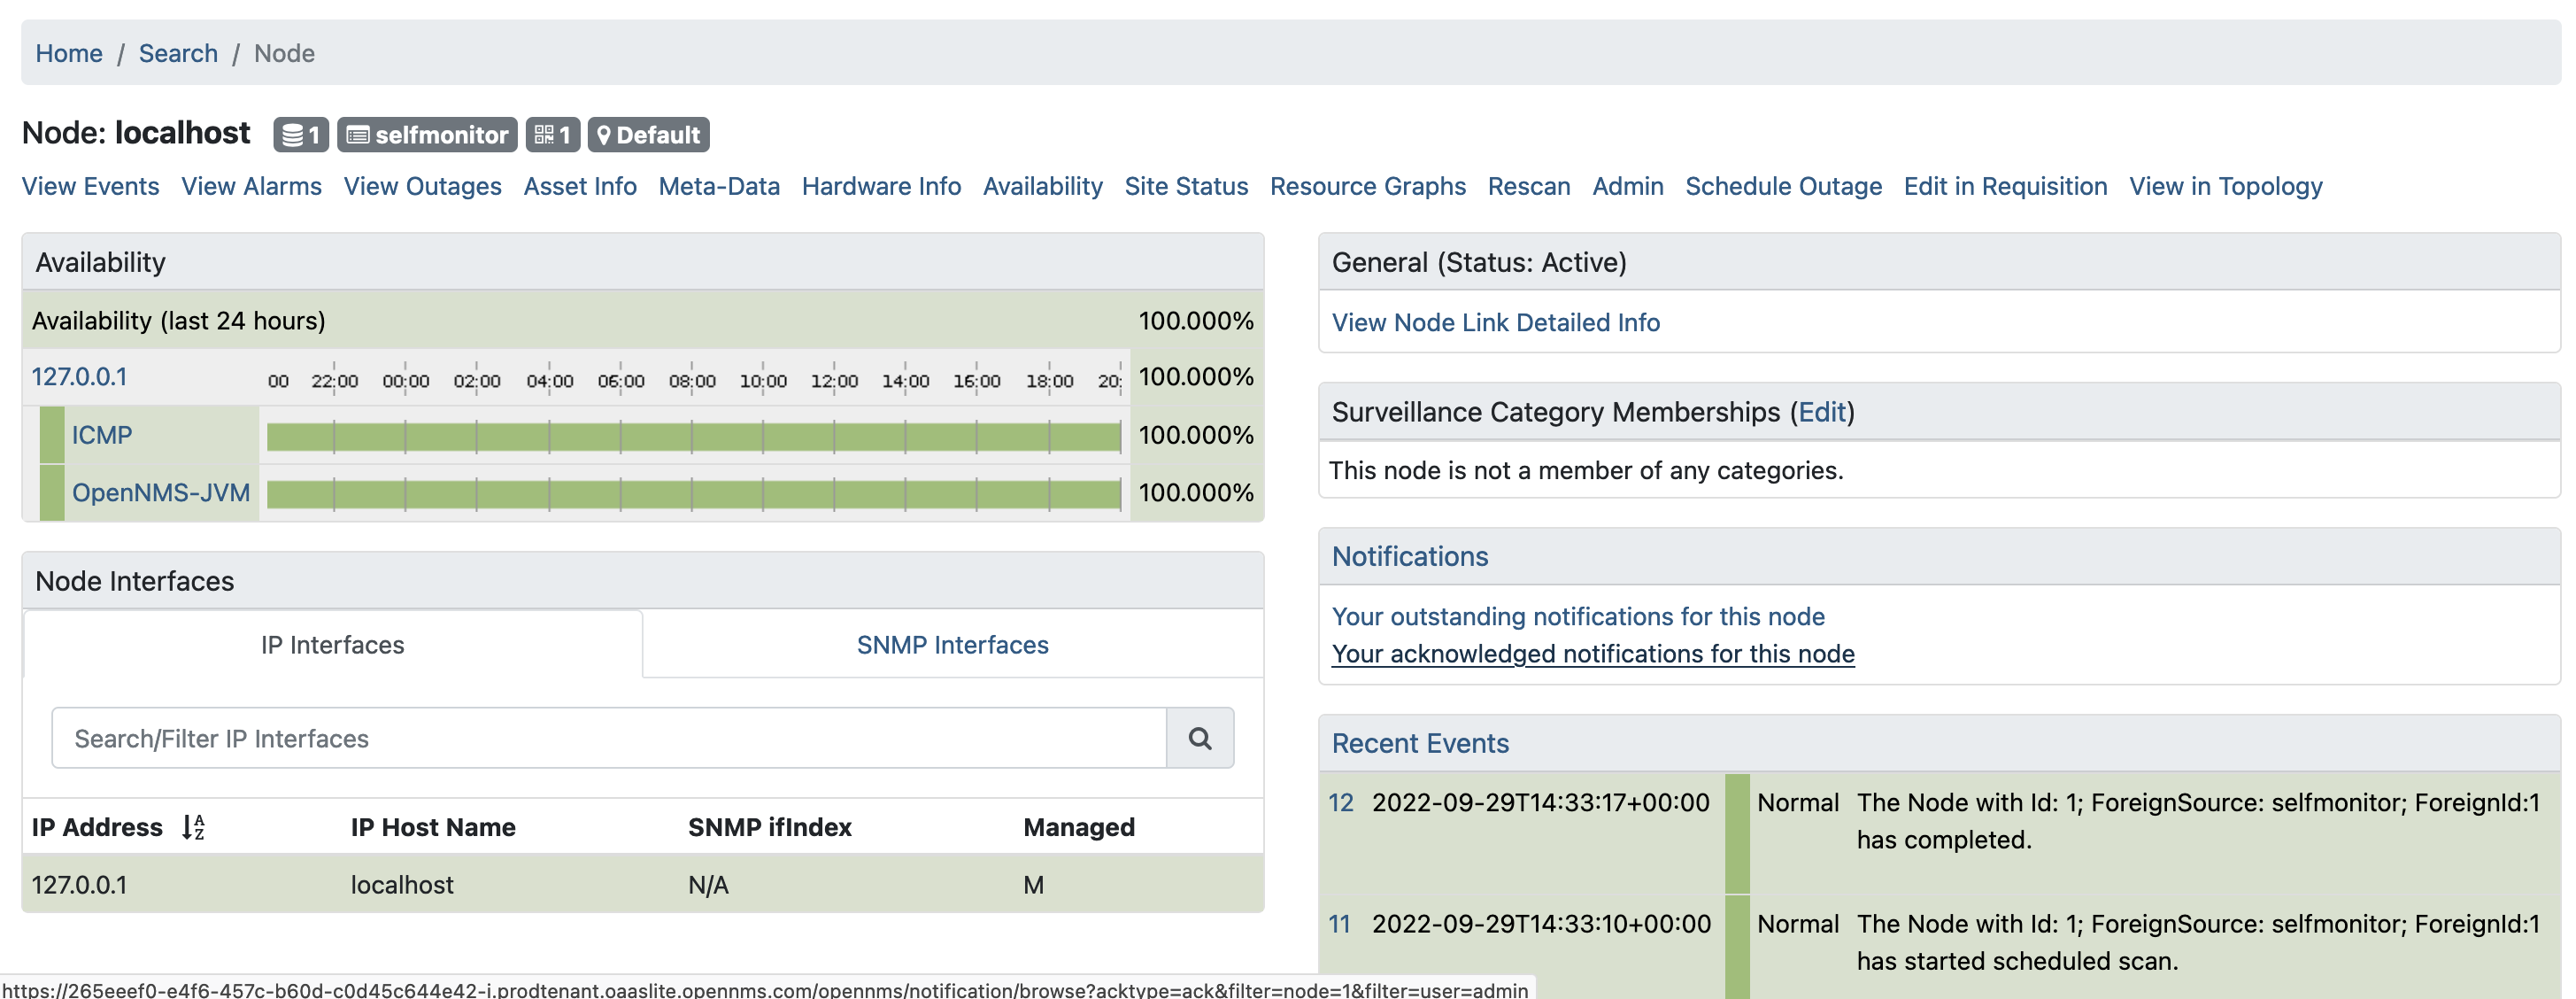 Meridian dashboard displaying service availability statistics for the localhost node